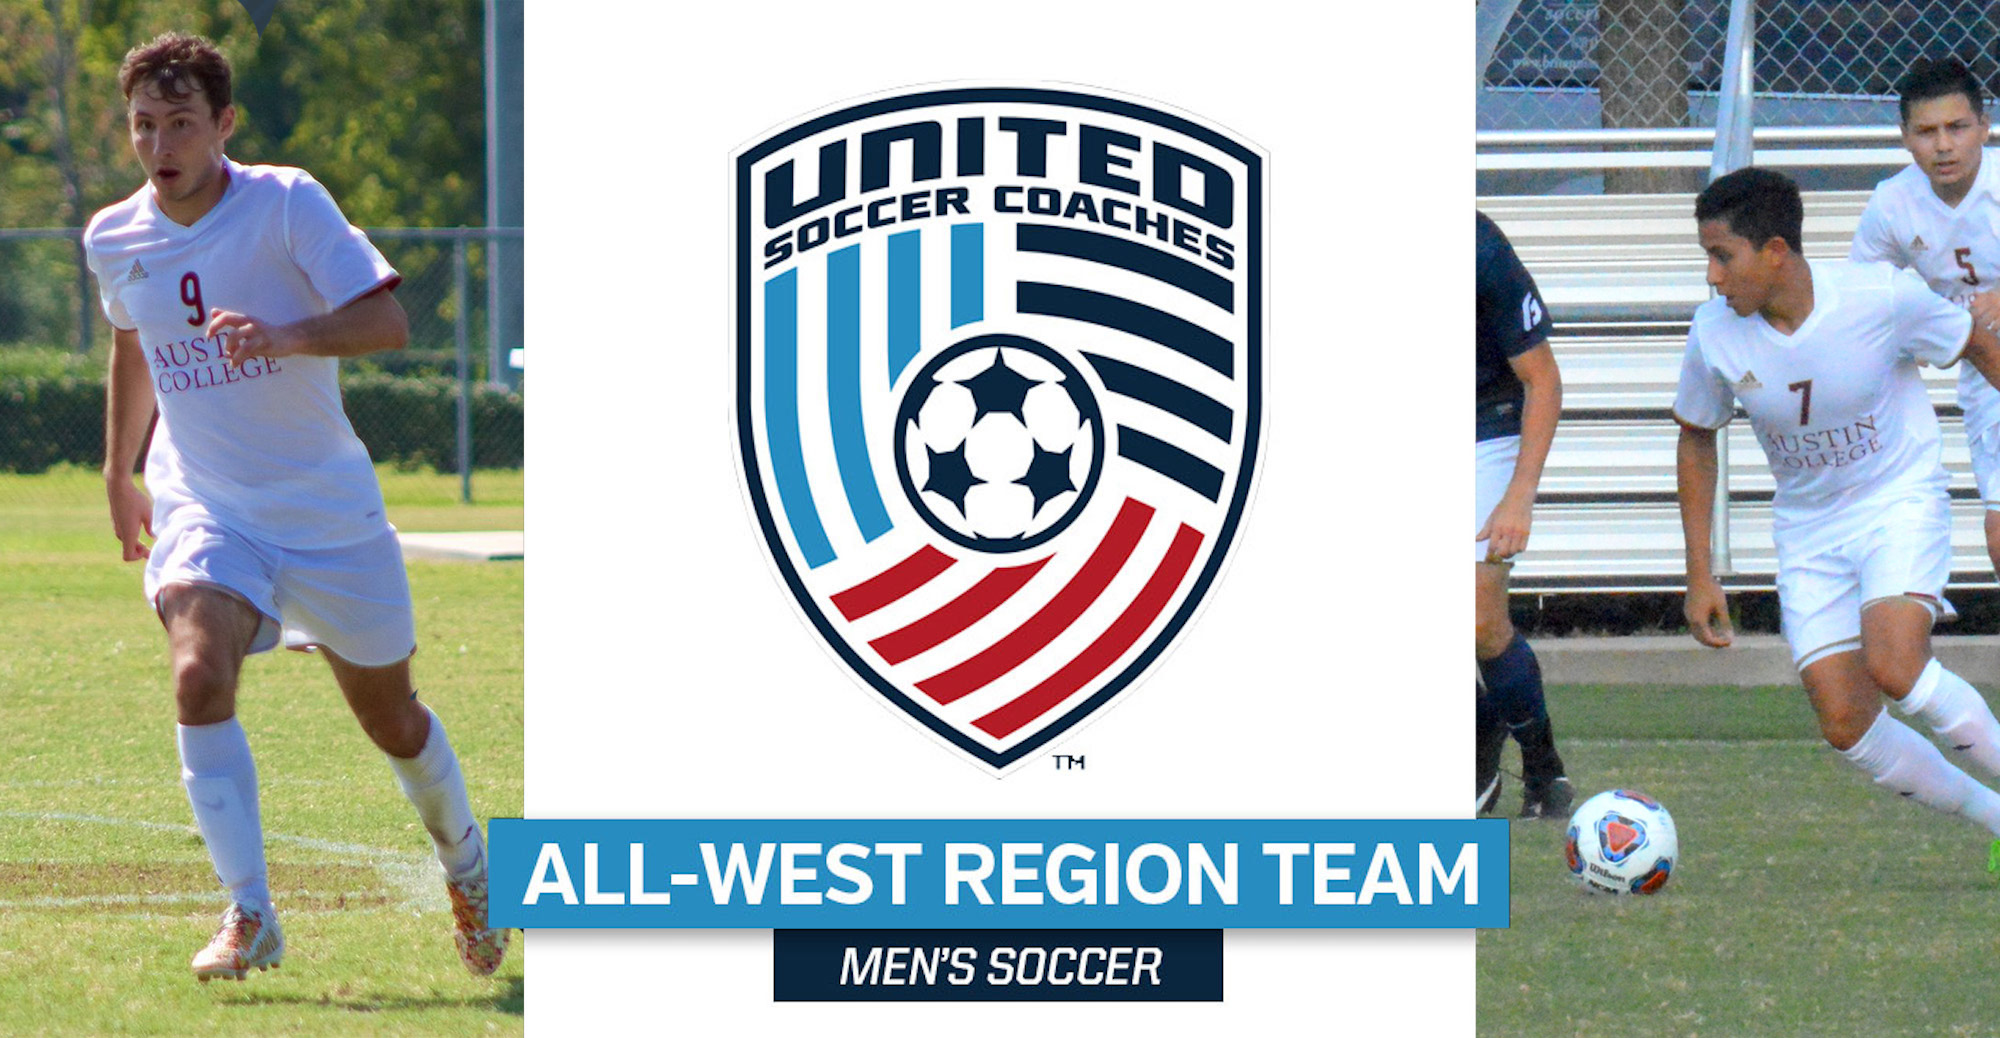 Quick, Le Earn All-West Region Honors